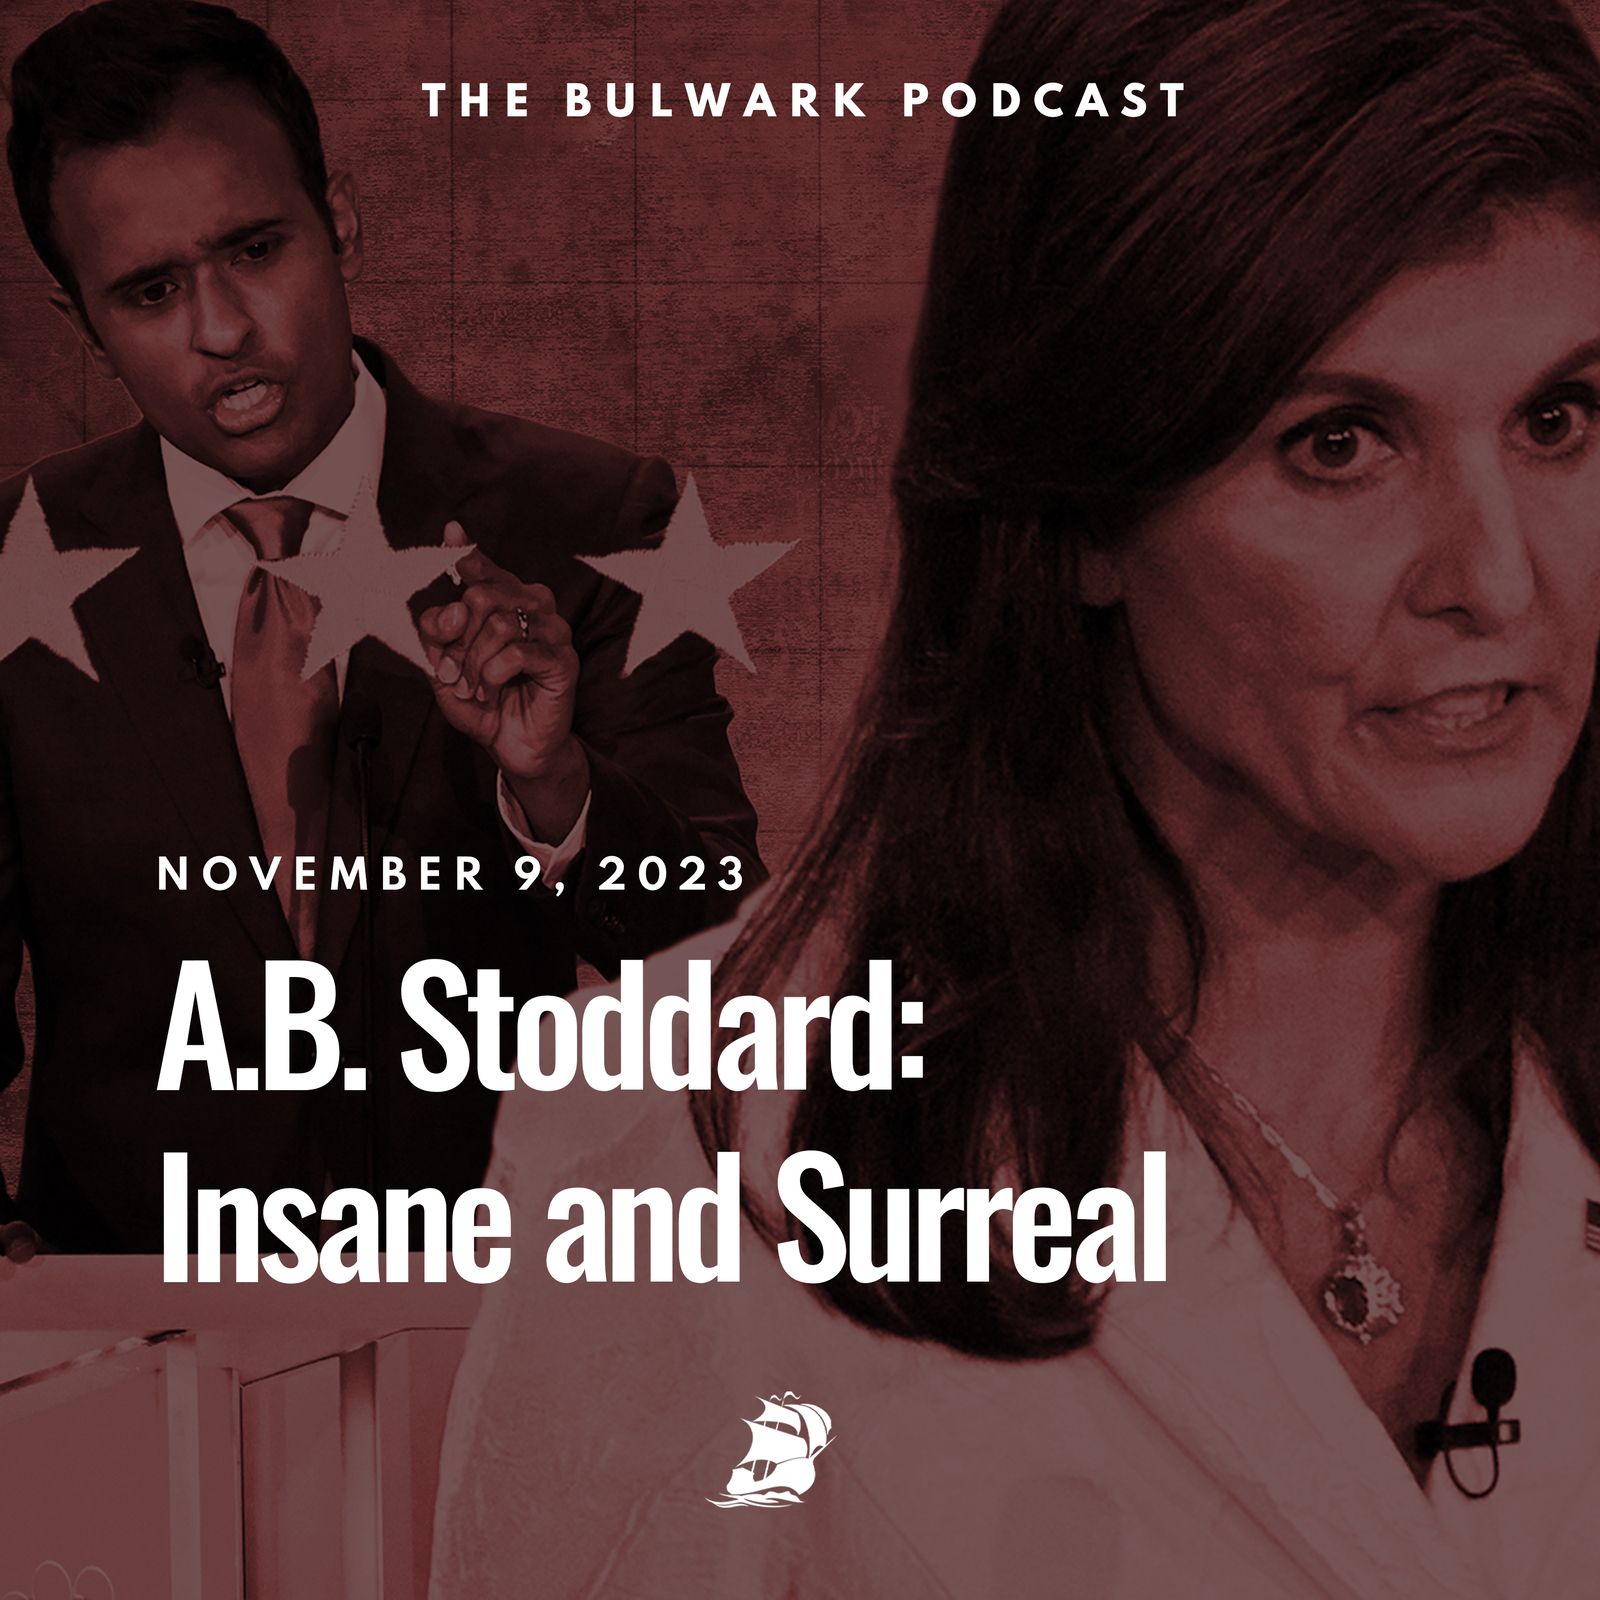 A.B. Stoddard: Insane and Surreal